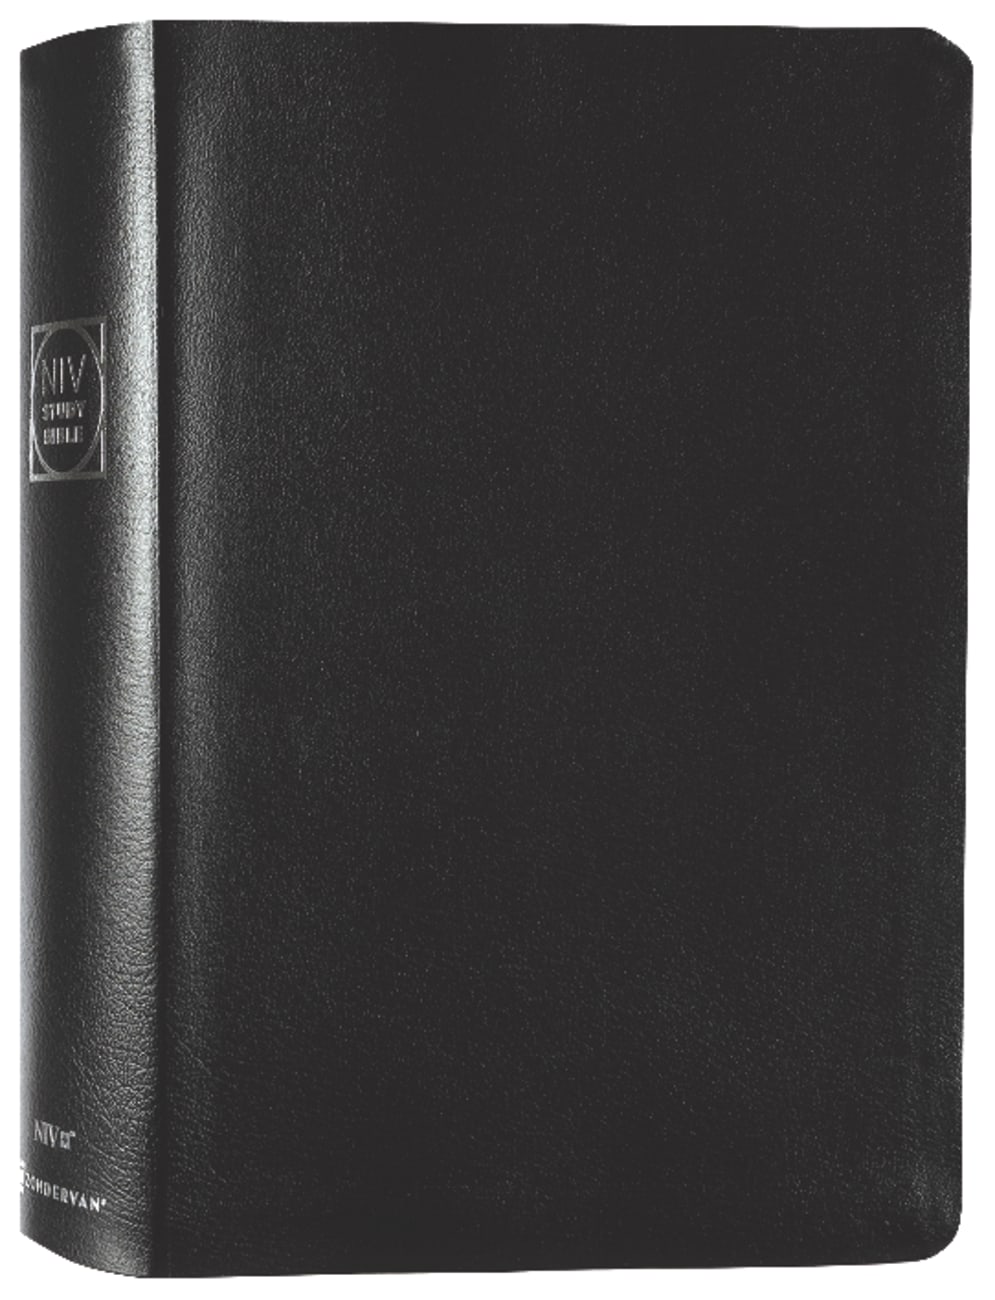 NIV Study Bible Black (Red Letter Edition) Fully Revised Edition (2020) Bonded Leather